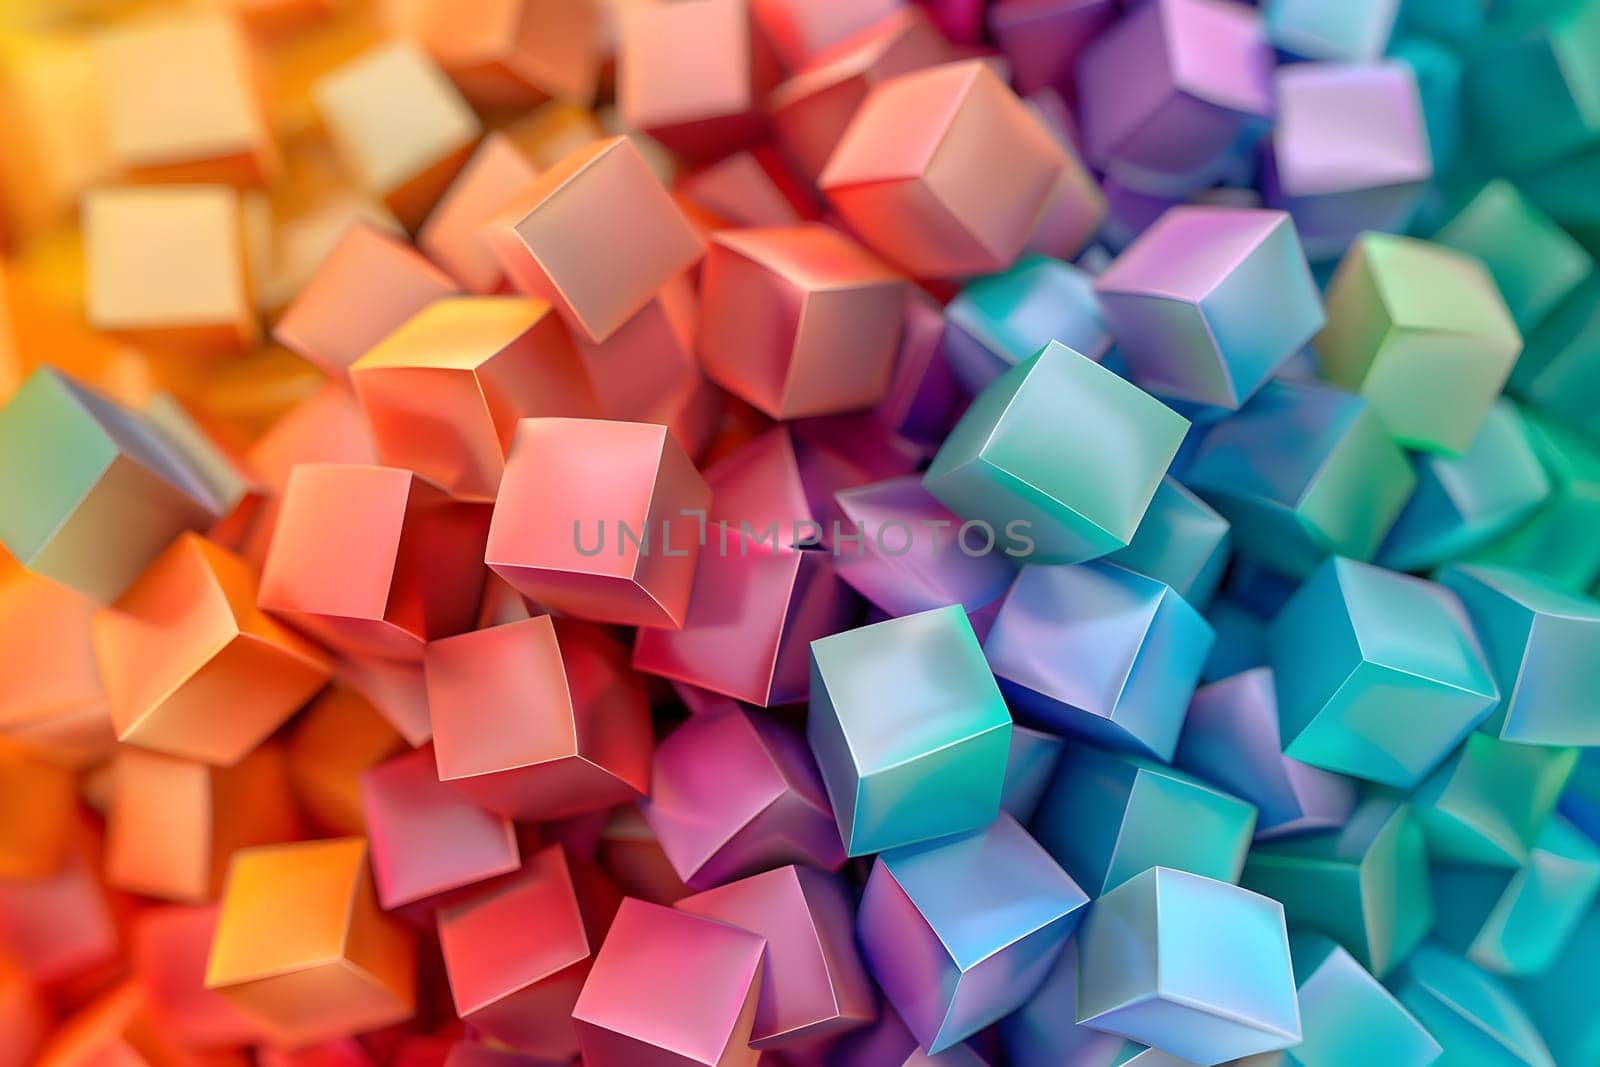 Colorful abstract cubic backdrop in rainbow hues showcases chaos, diversity and creativity in a 3D rendering perfect for graphic design.